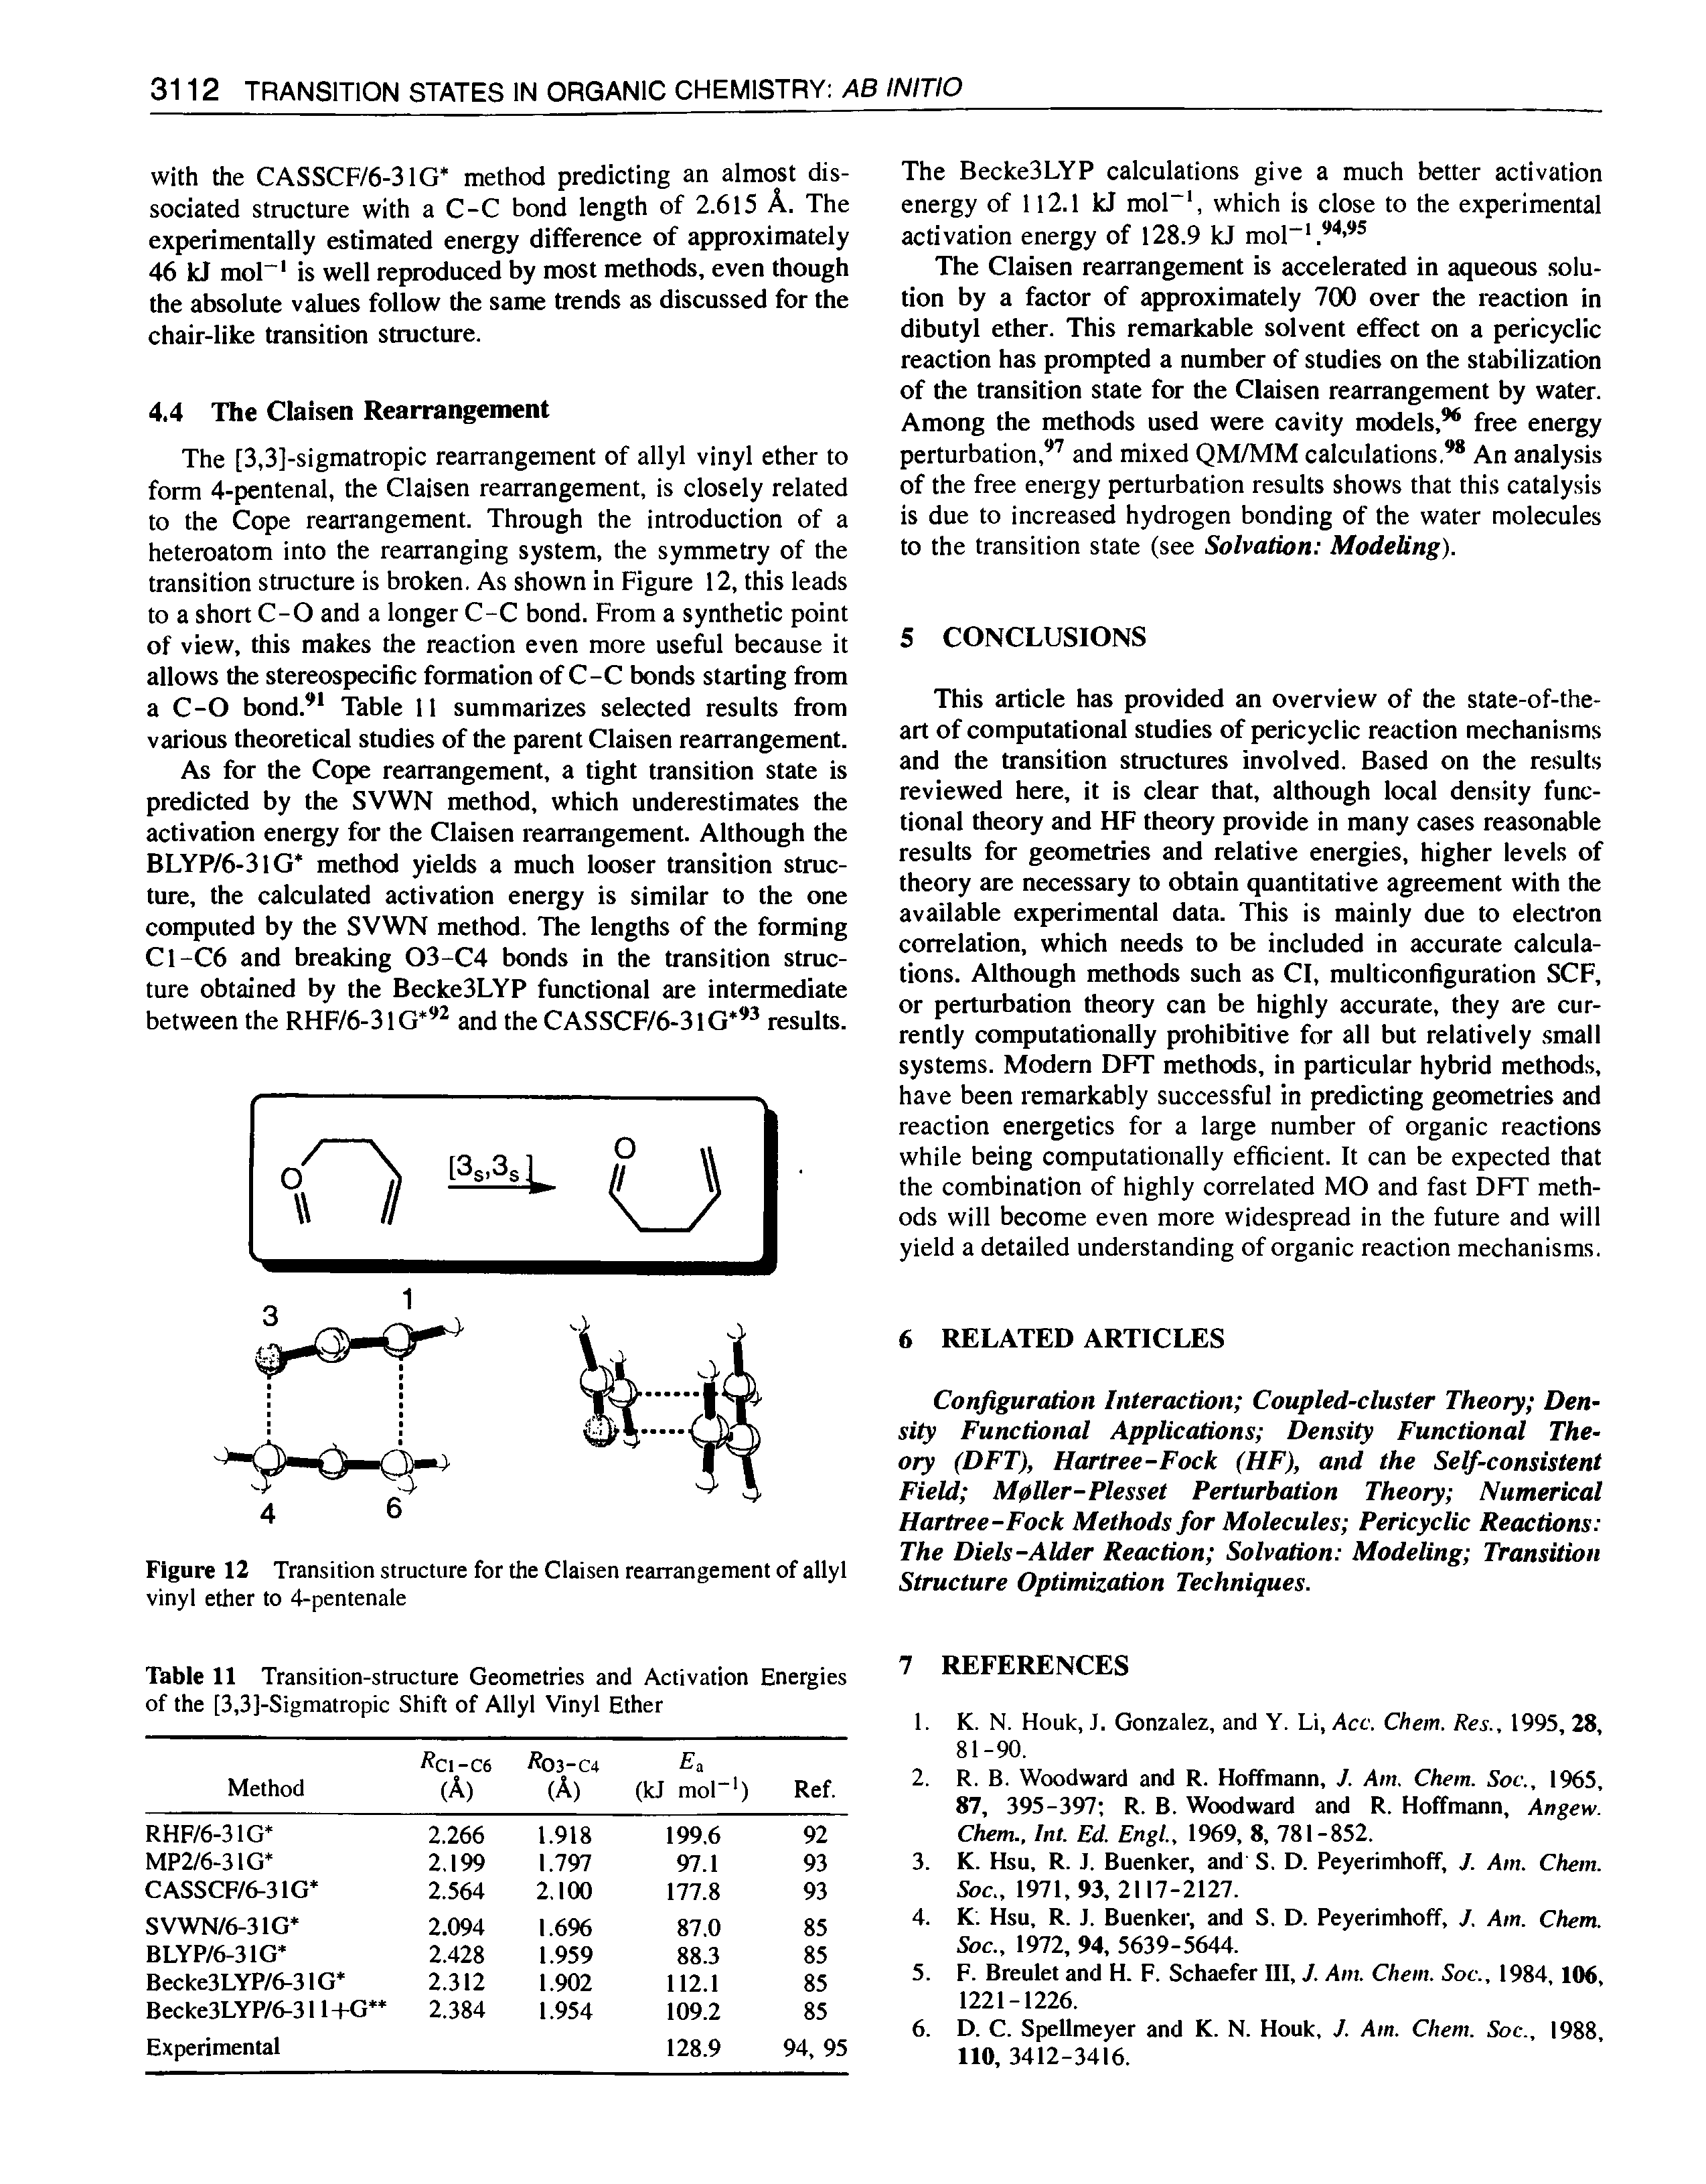 Table 11 Transition-structure Geometries and Activation Energies of the [3,3]-Sigmatropic Shift of Allyl Vinyl Ether...